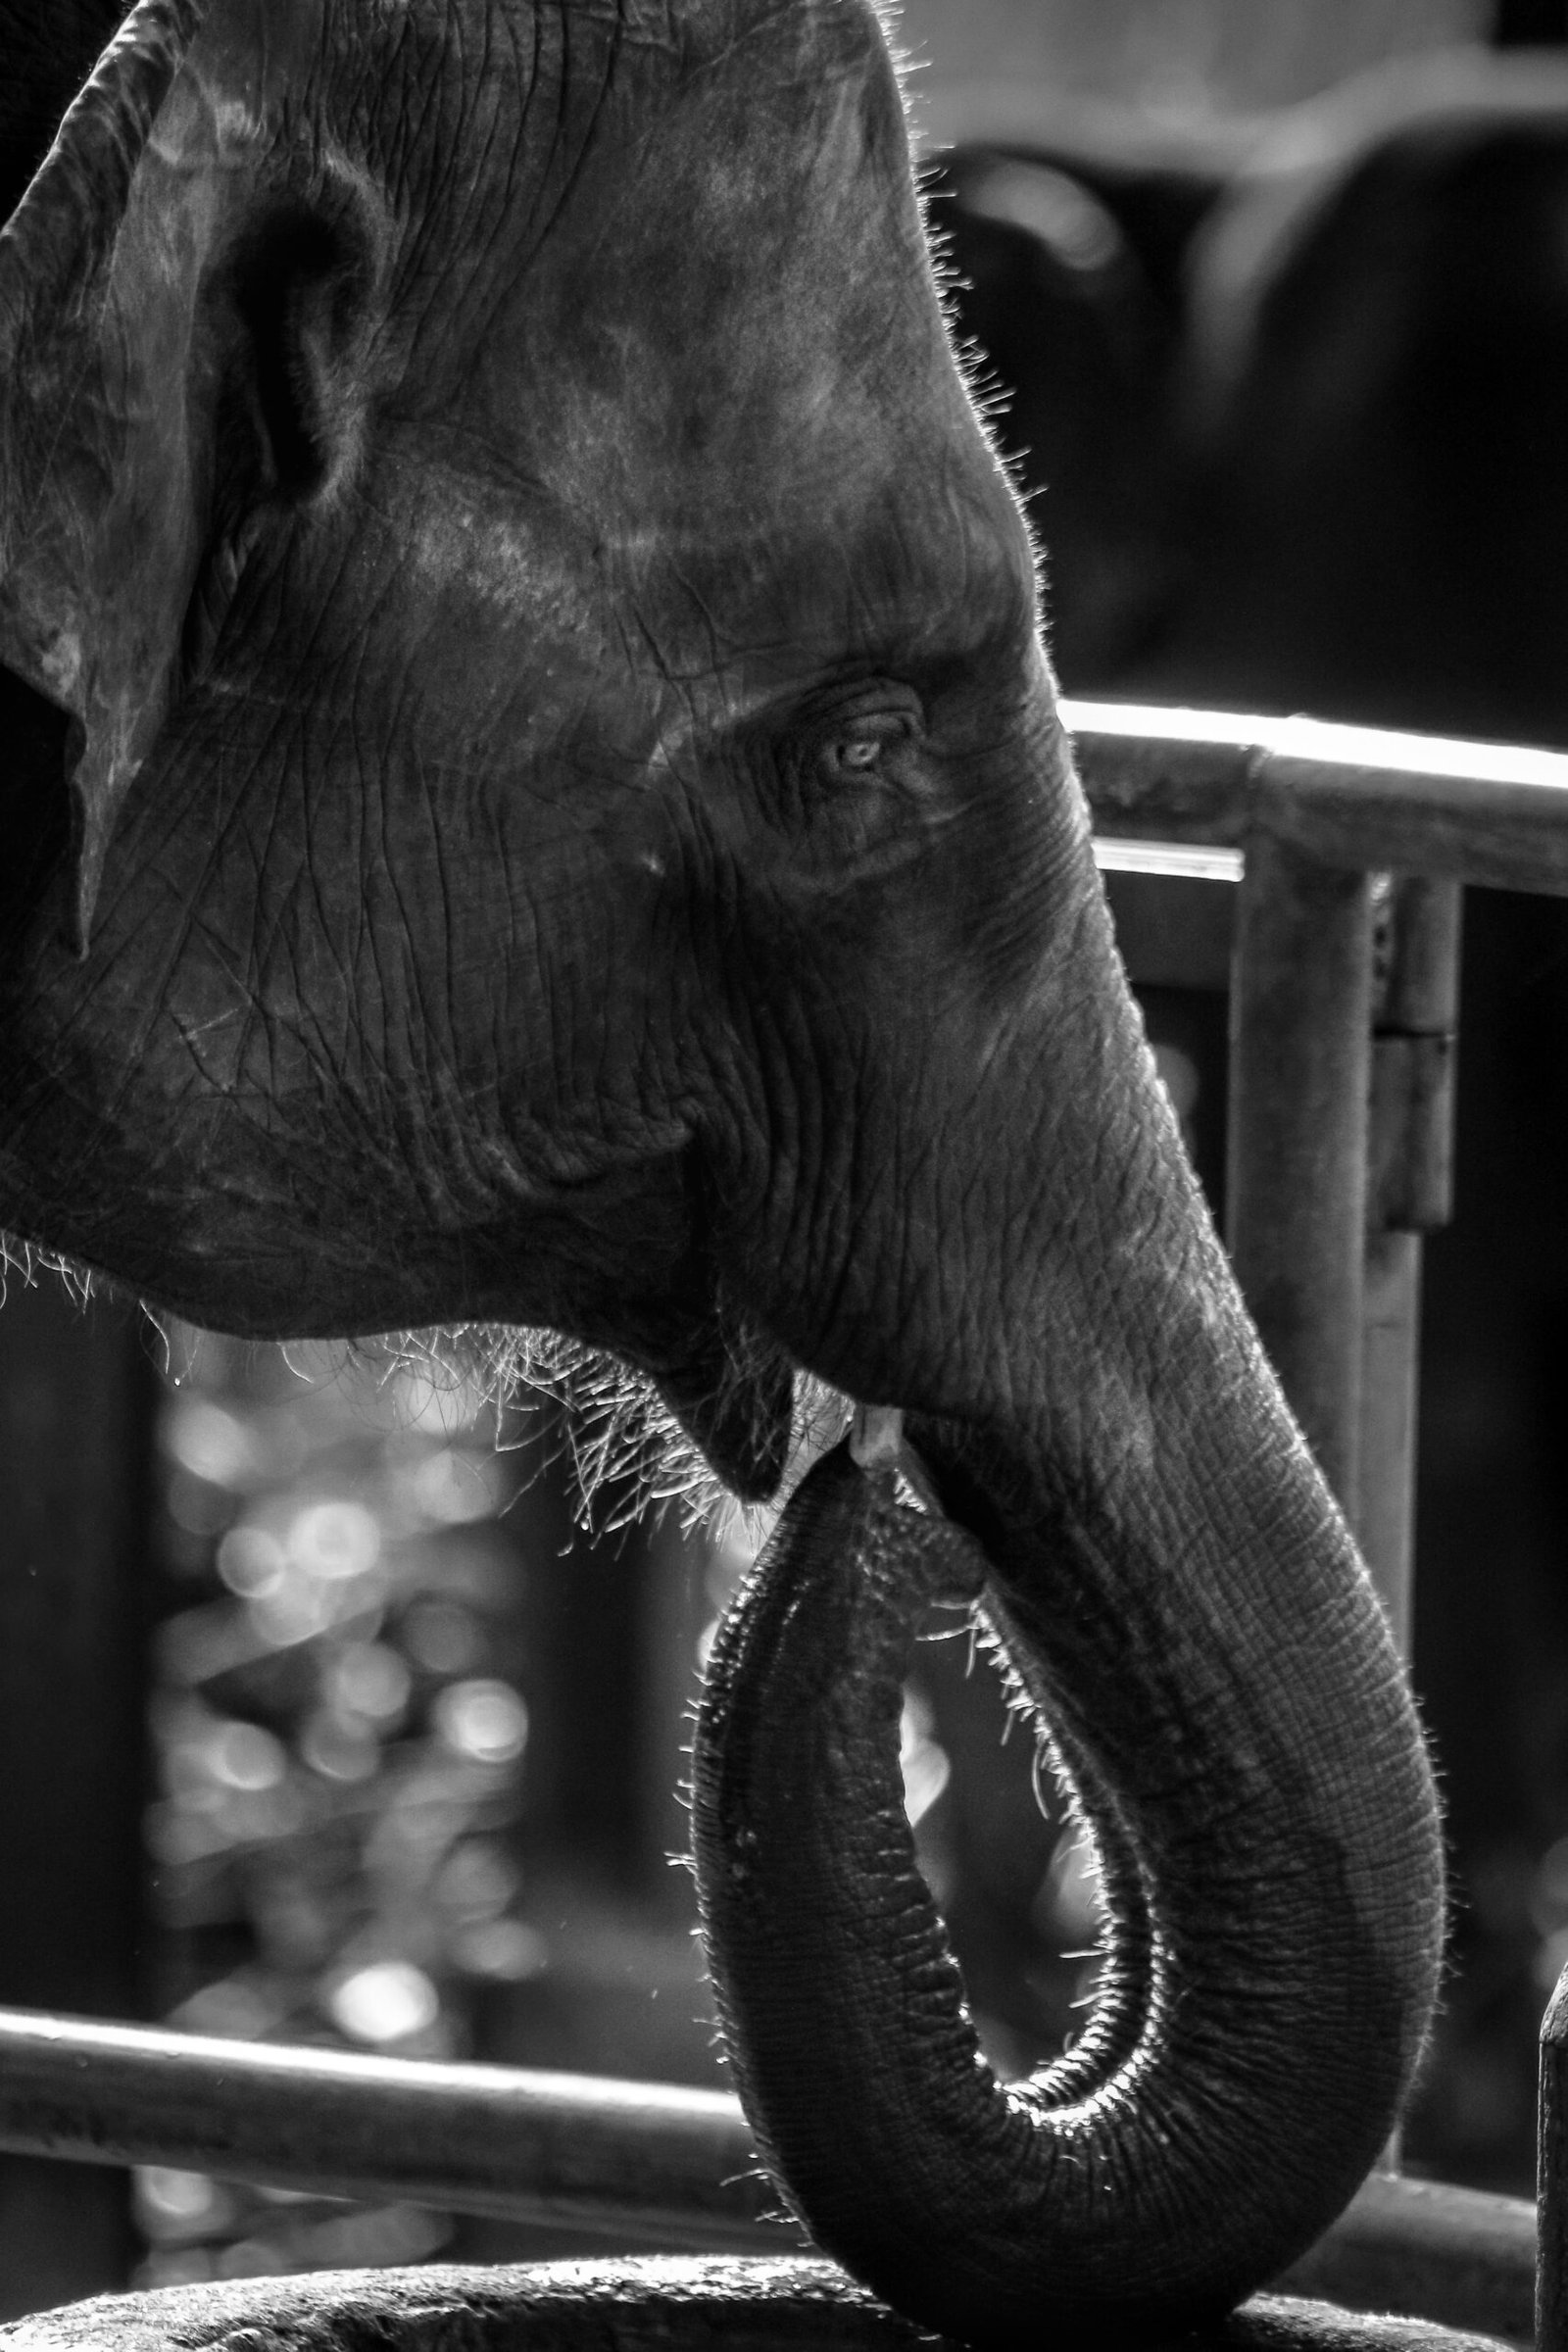 elephant in grayscale photography during daytime